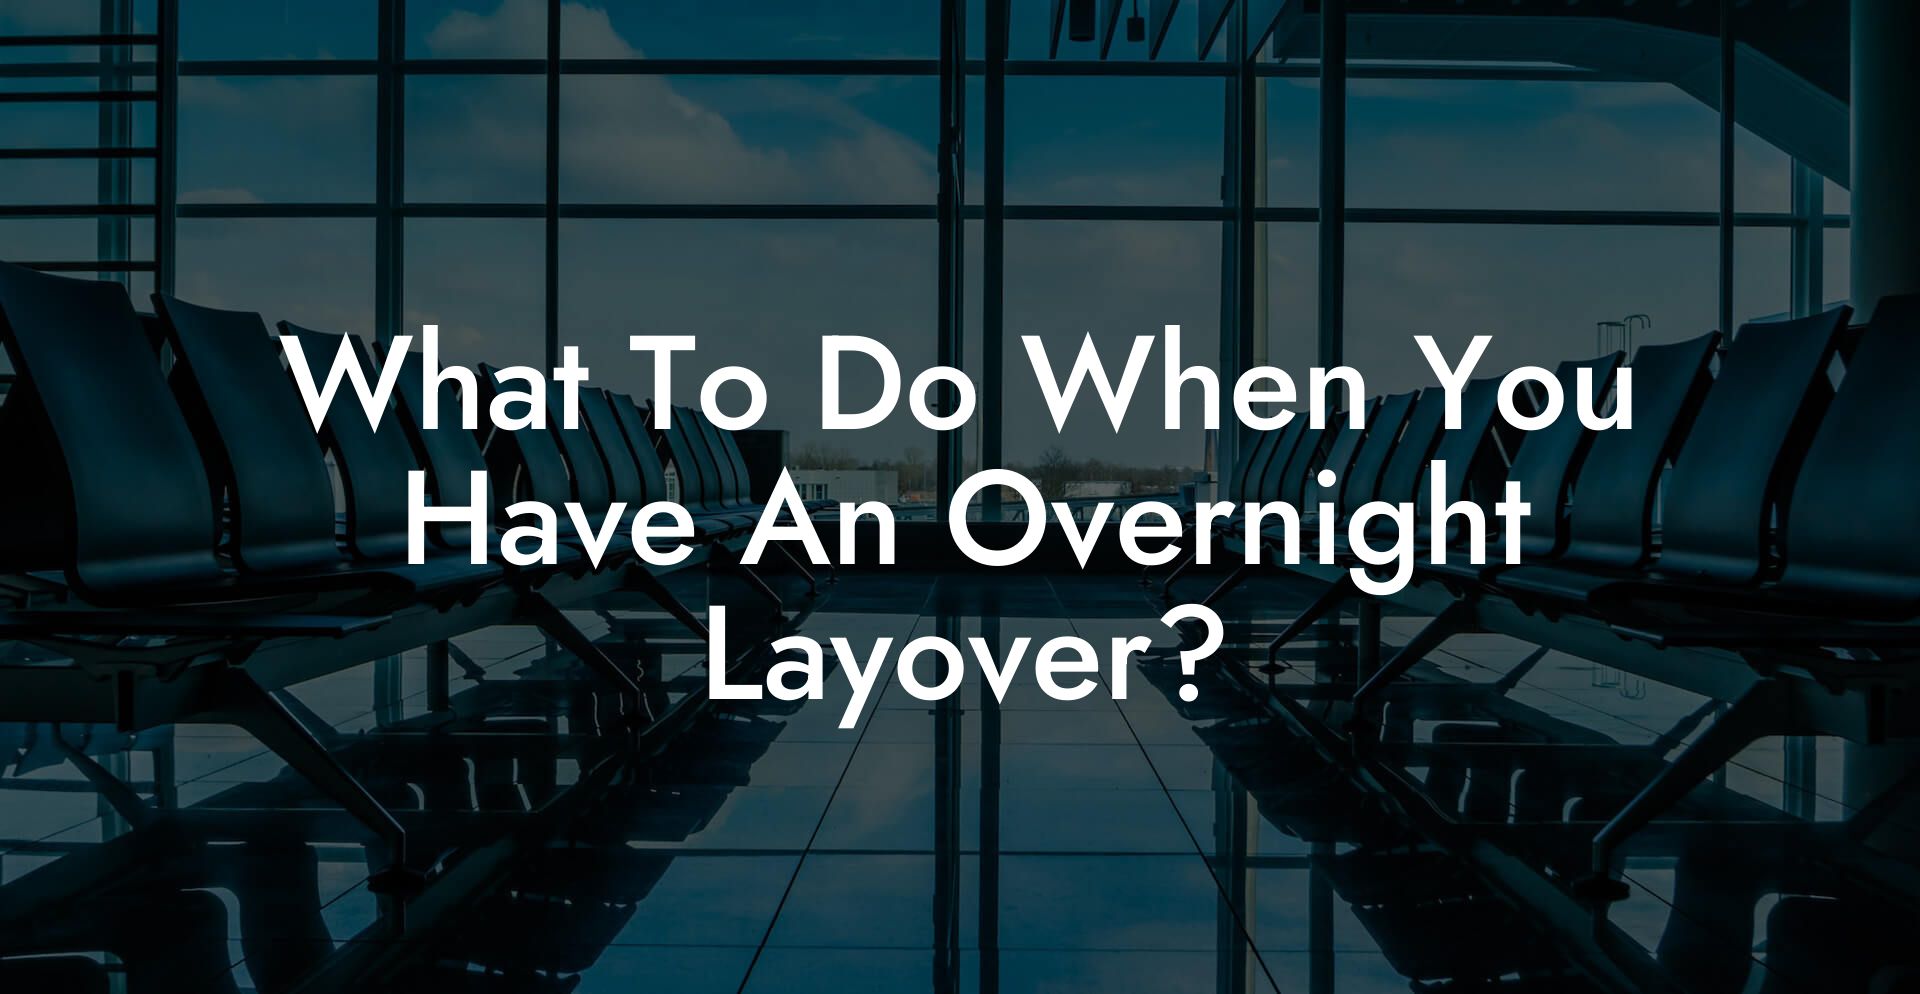 What To Do When You Have An Overnight Layover?